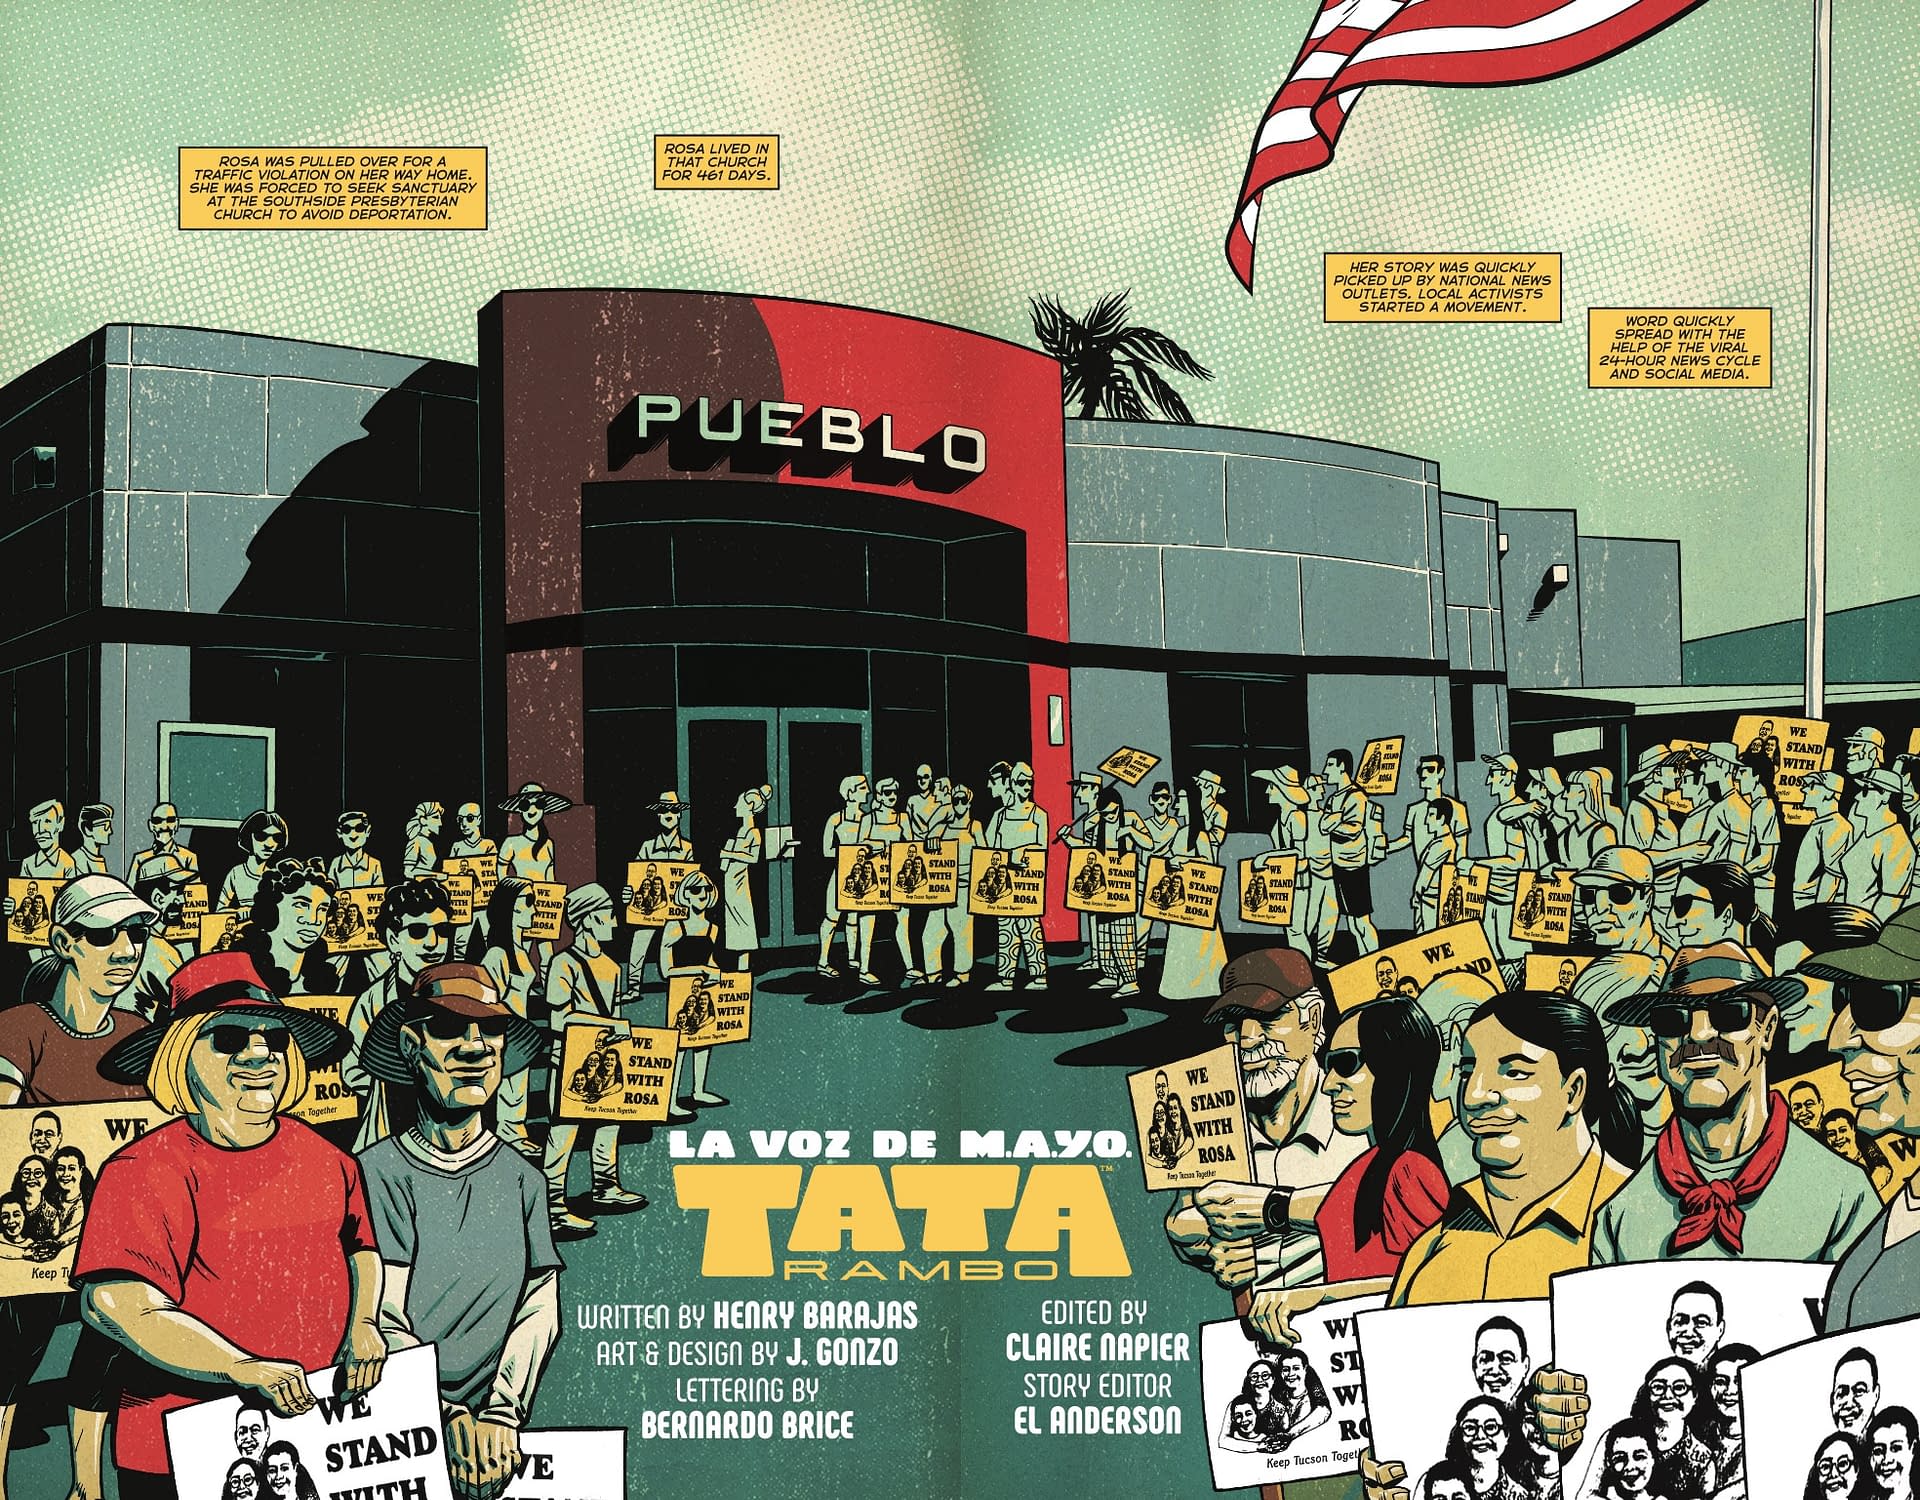 Read the 1st Issue of La Voz De M.A.Y.O. Tata Rambo FREE as 2nd Issue Now on Kickstarter